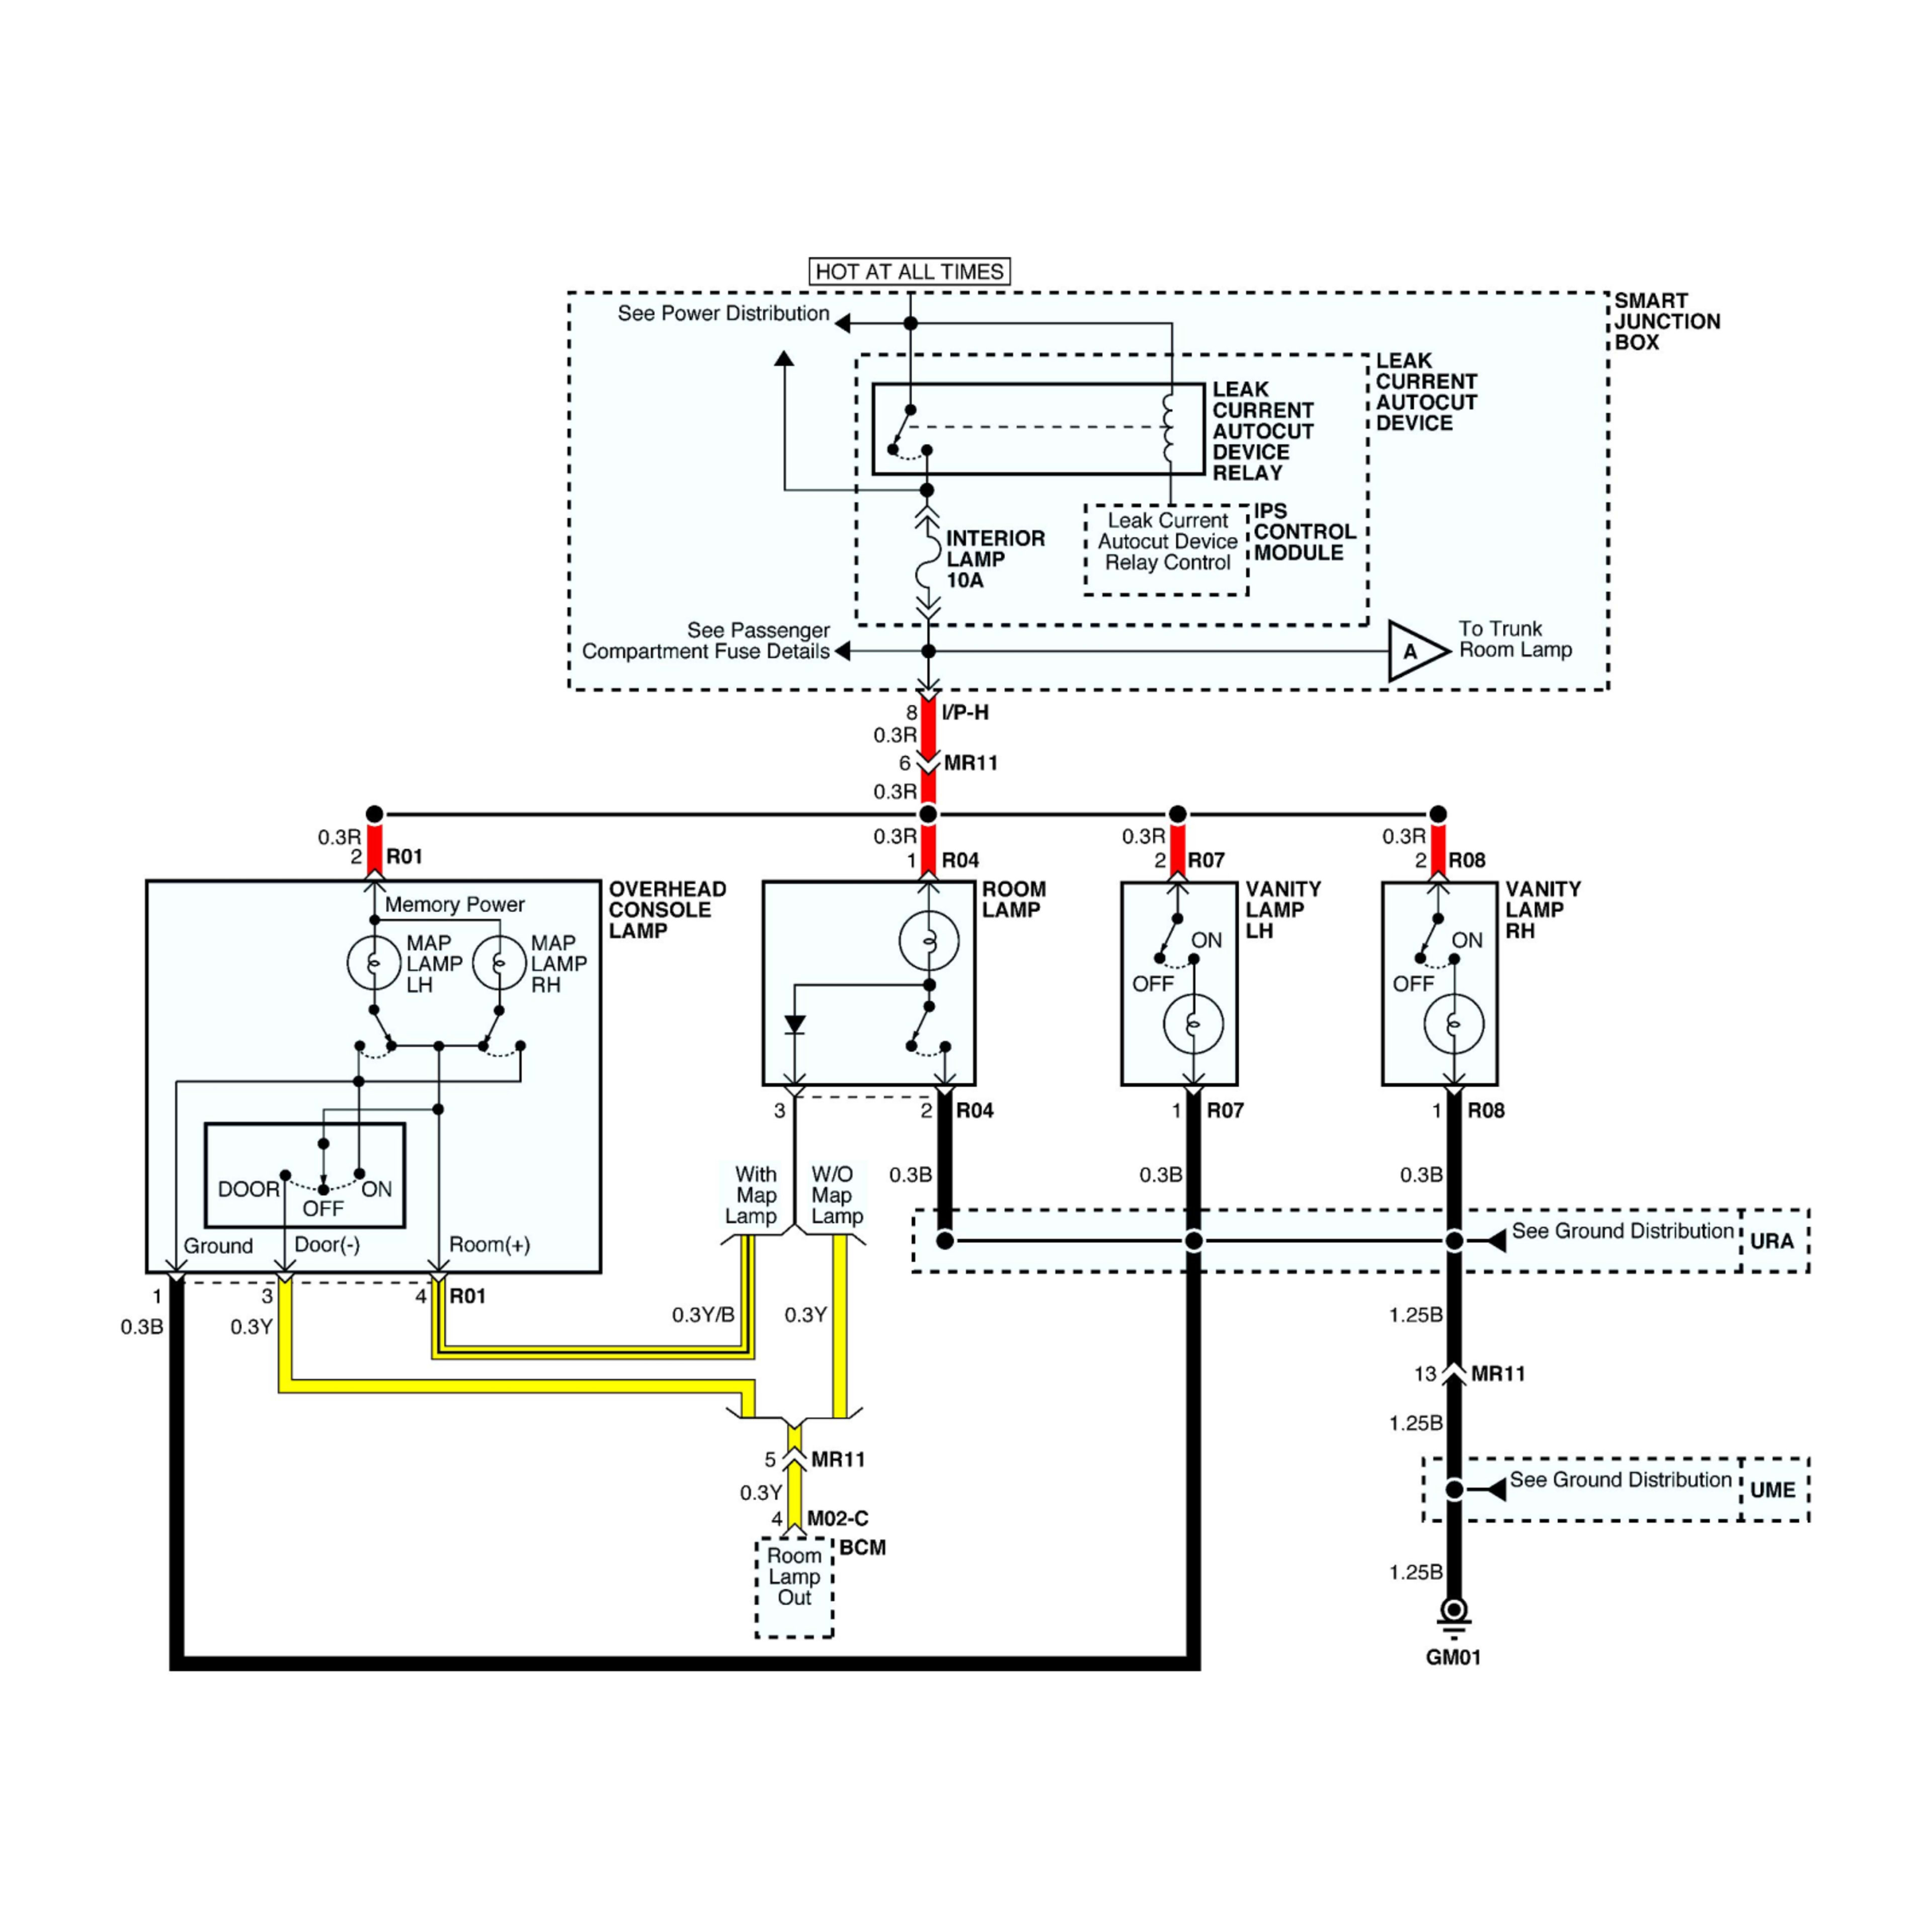 2012 Mercedes-Benz S63 AMG wiring diagrams example